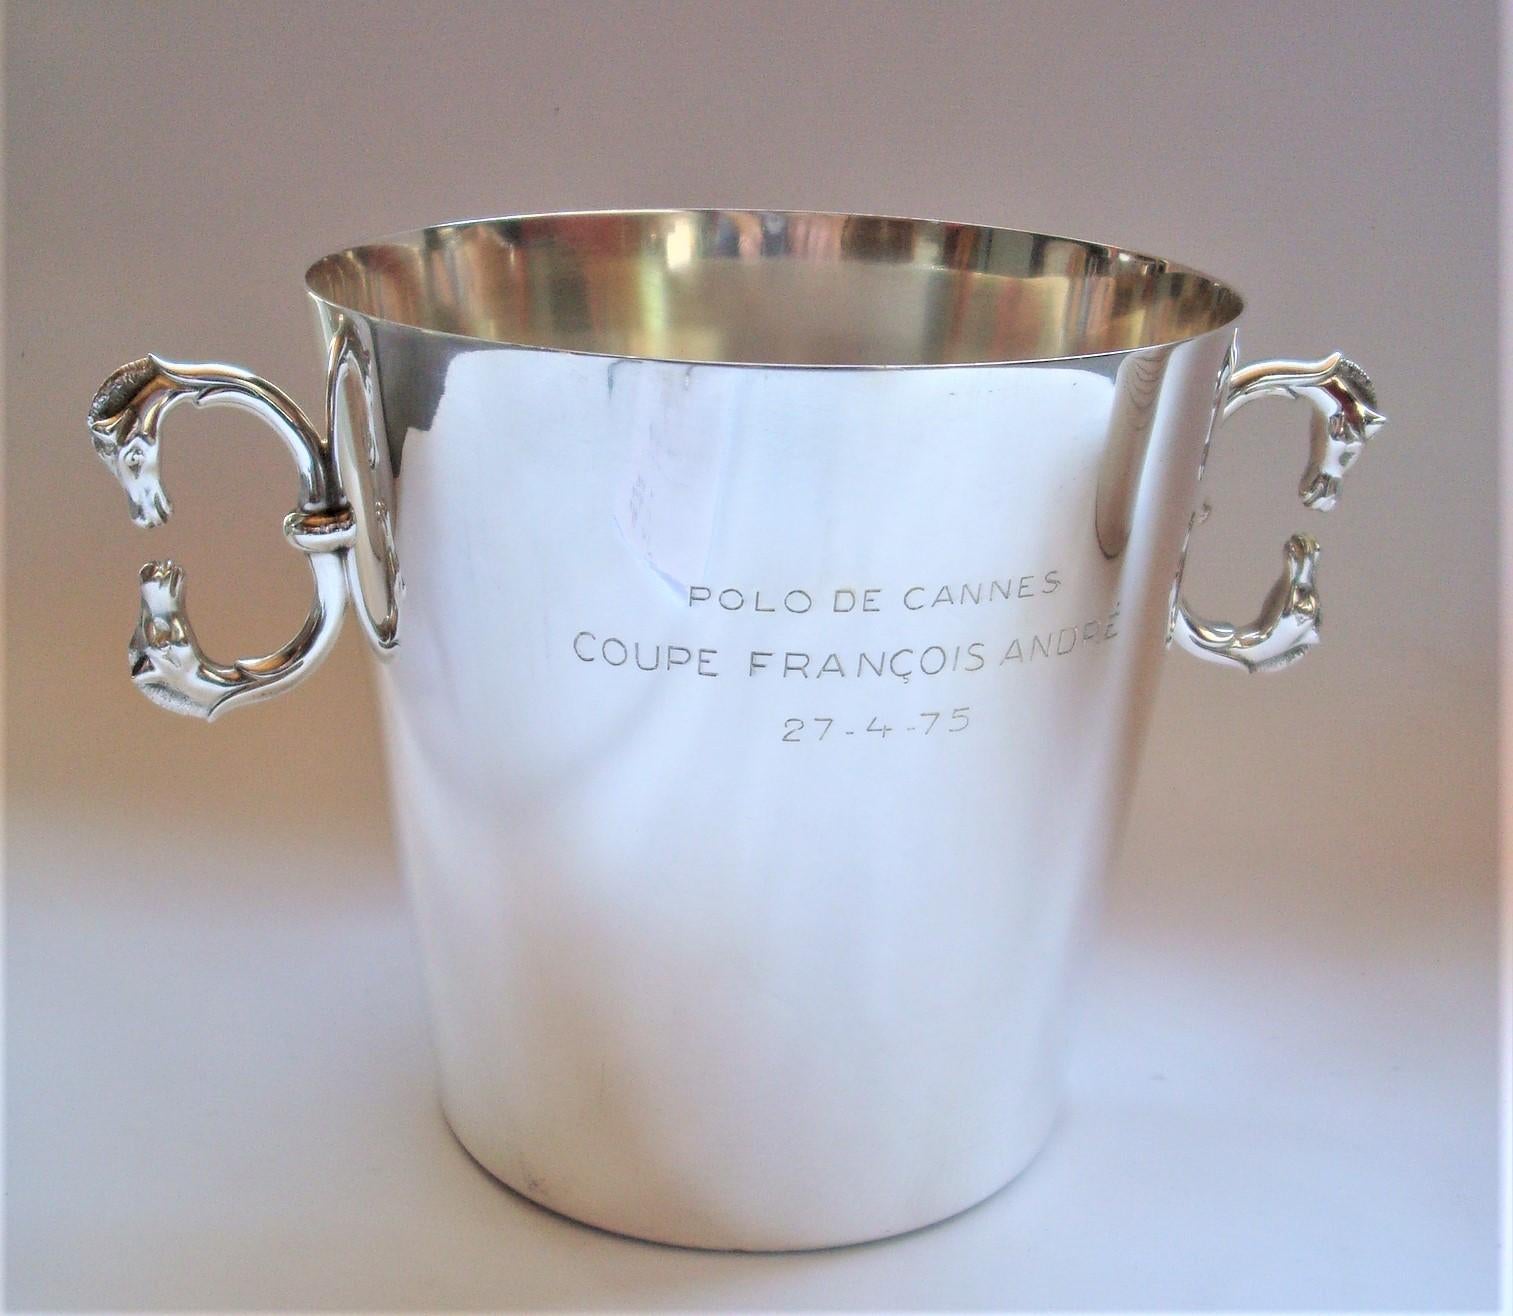 French Hermes Champagne / Wine Bucket, Cooler, Polo Trophy Cannes 1975